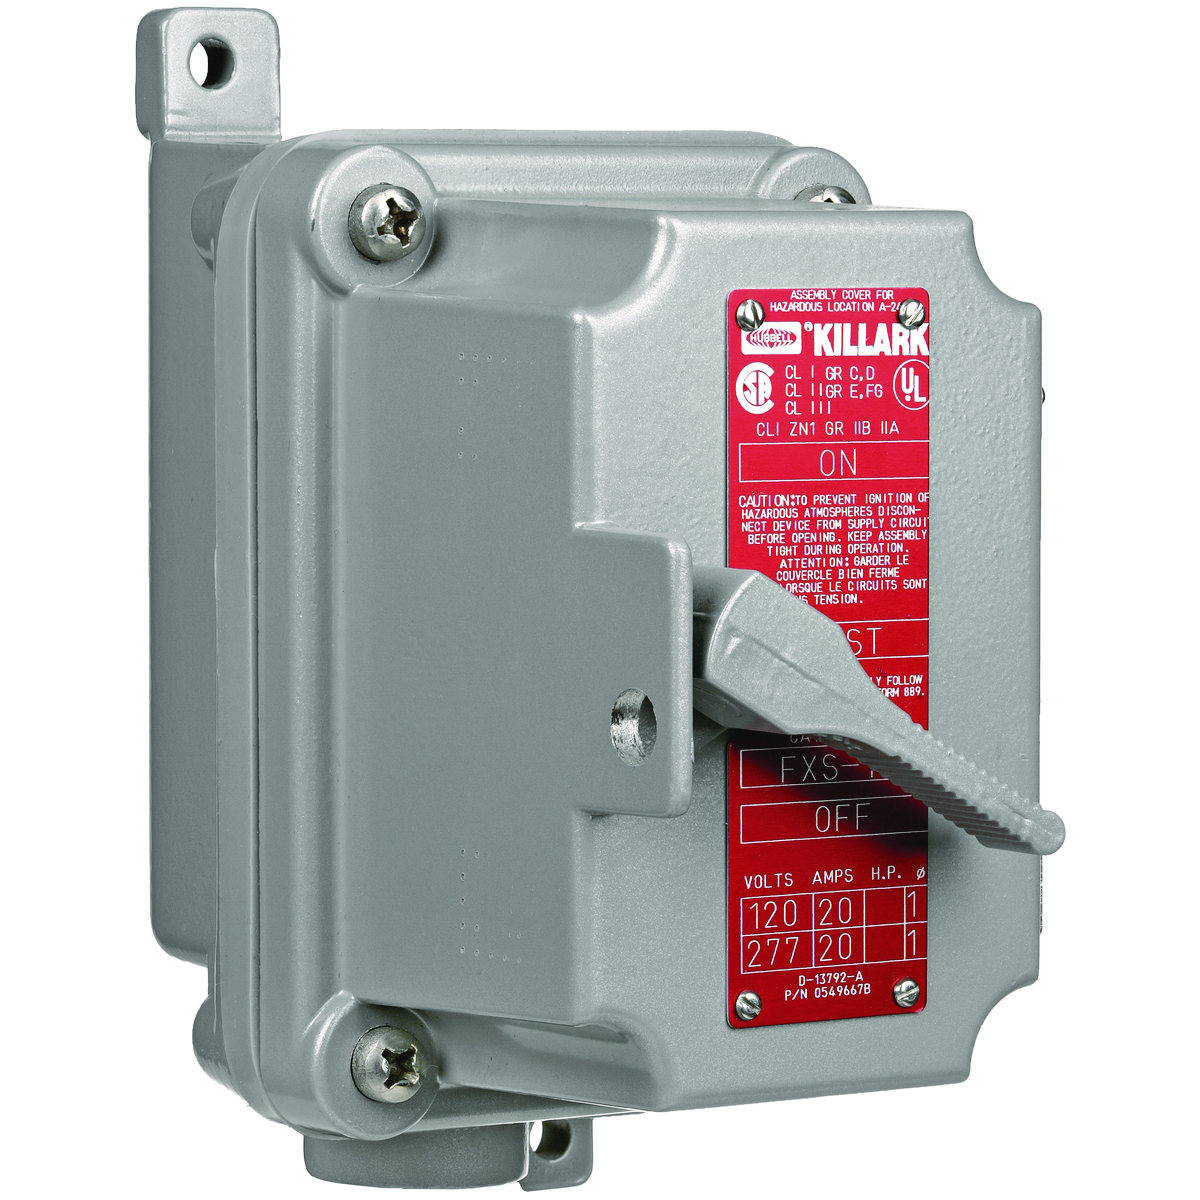 FXSX SERIES - ALUMINUM DEAD-END SINGLE GANG 3-POLE, 3-PHASE MANUALMOTORSTARTING SWITCH UNIT - WITHOUT OVERLOAD PROTECTION - HUB SIZE 3/4INCH